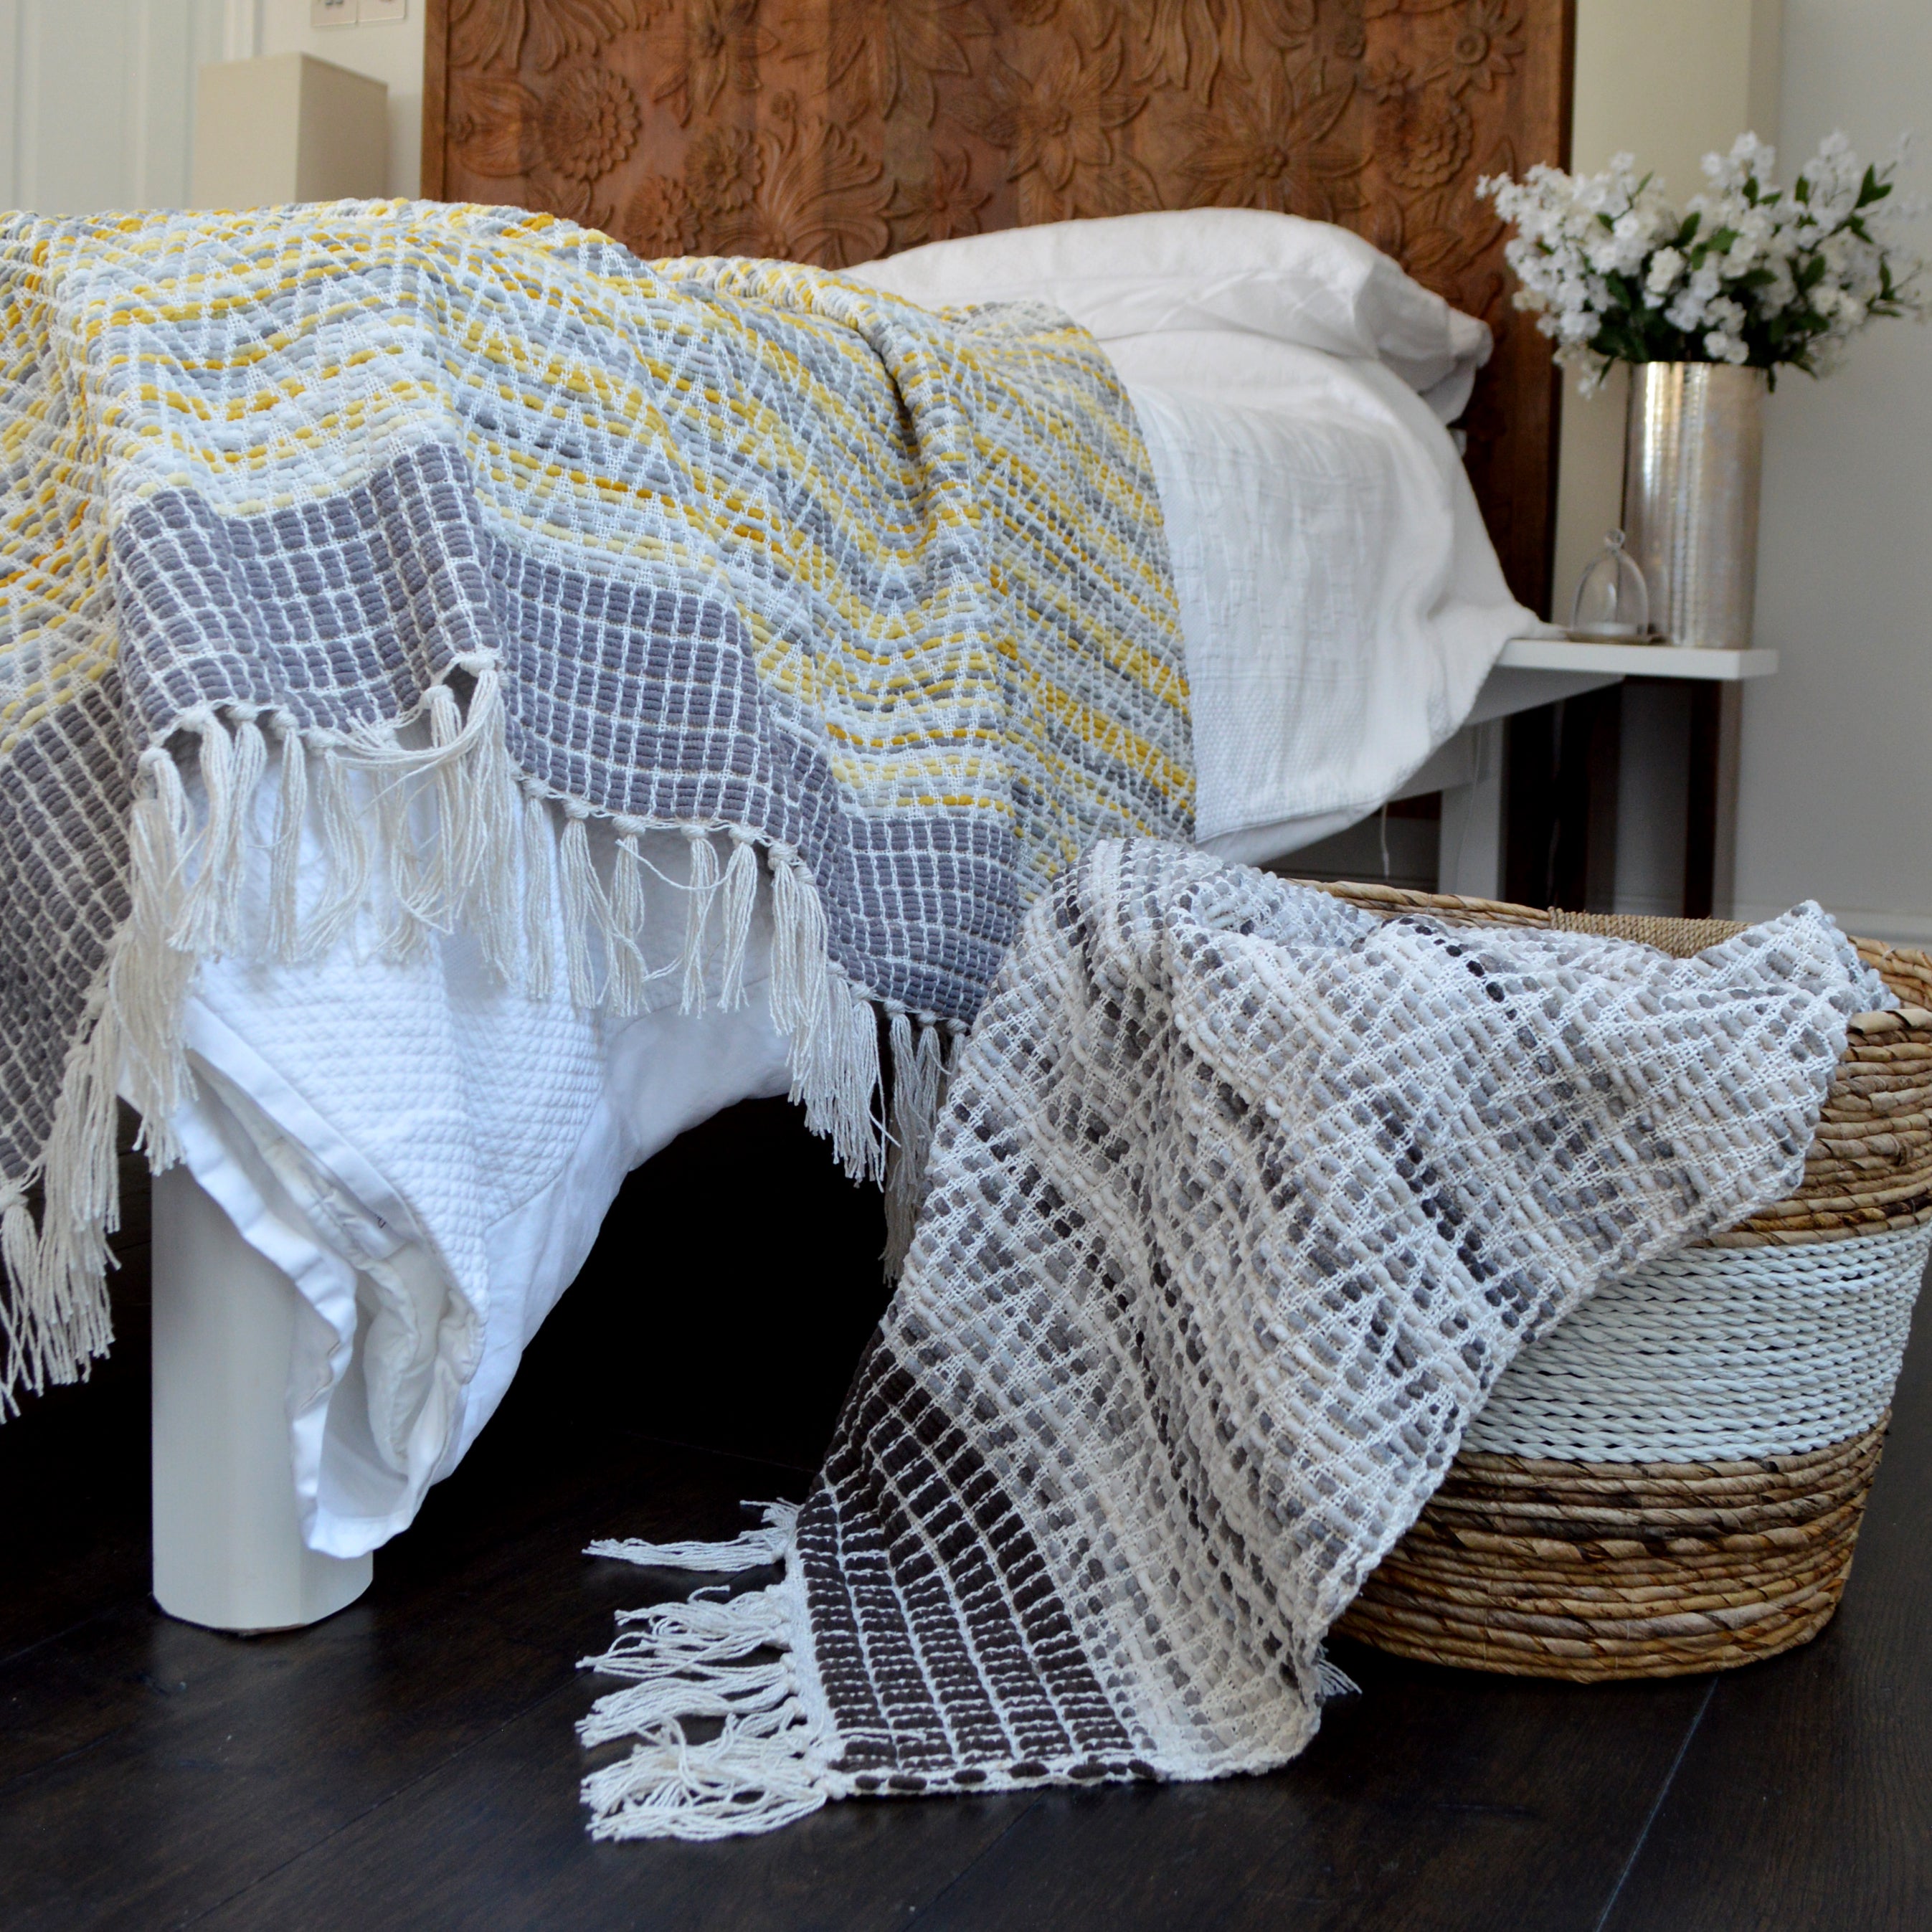 Patterned Zig Zag Throws - Premium Blankets for the home